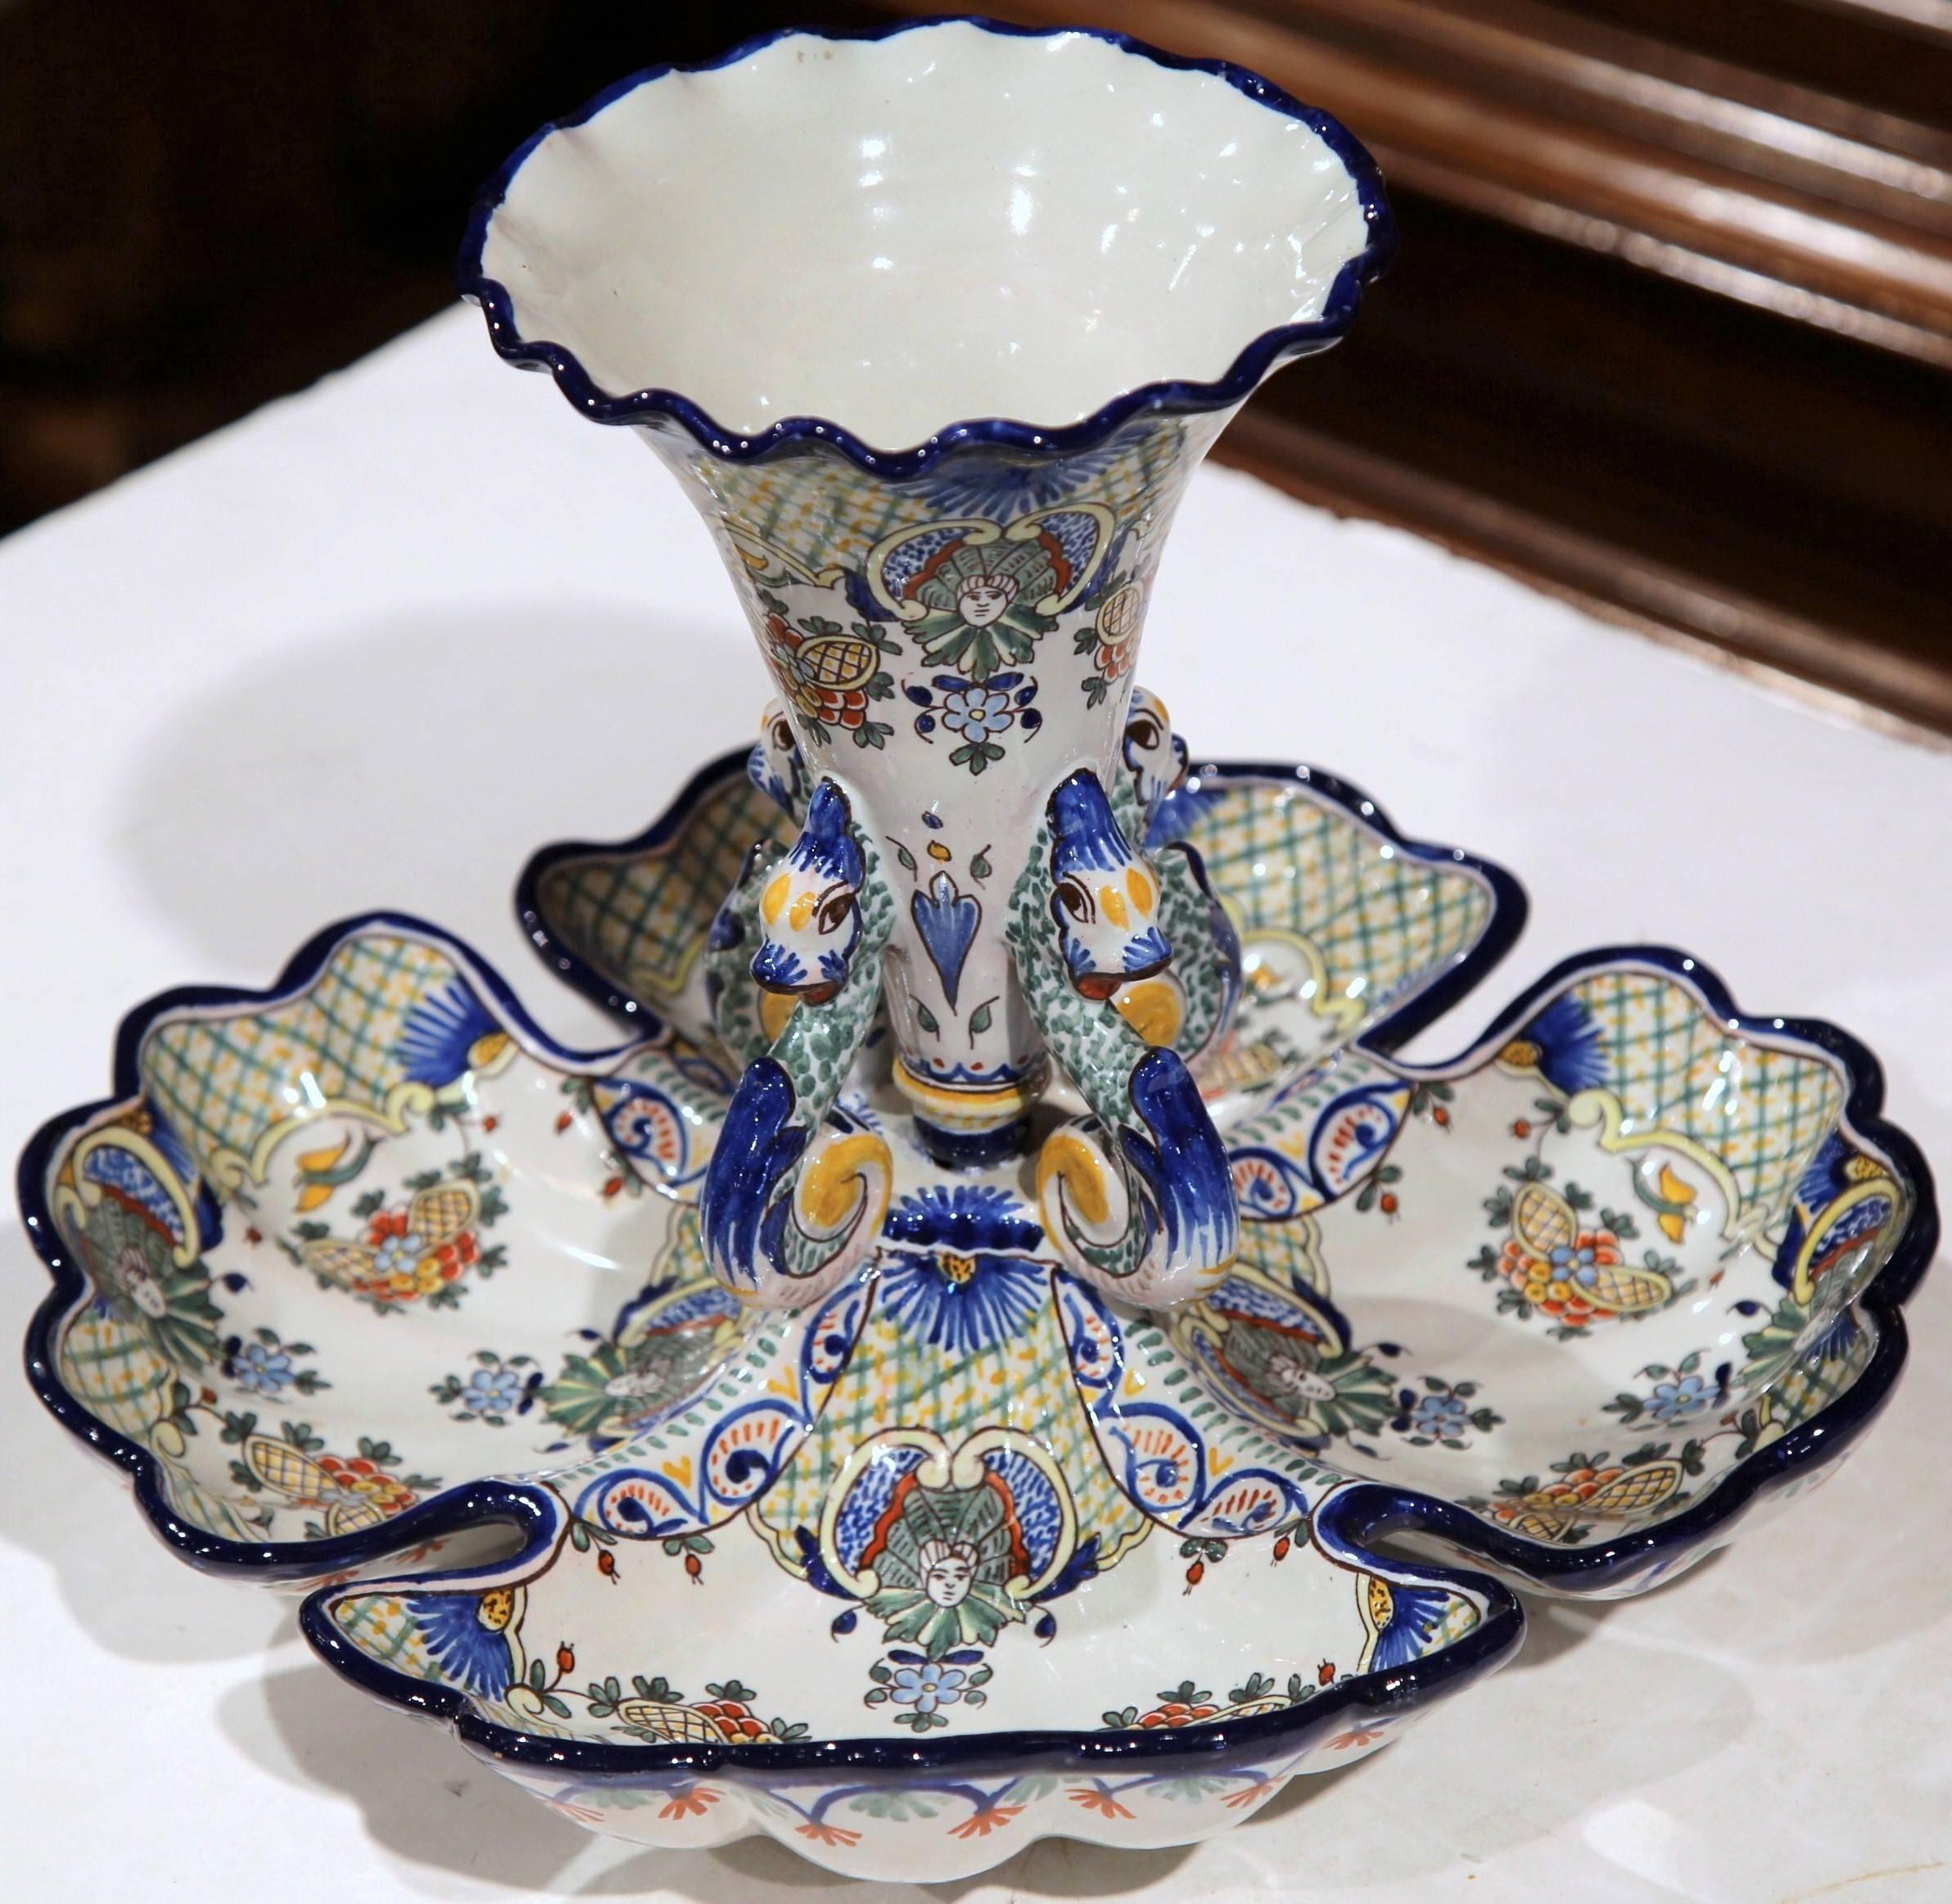 This elegant antique dish was sculpted in Nevers, Central France, circa 1910. The colorful piece has four separate contiguous compartments, embellished with a tall vase in the center. The piece is signed on the bottom 